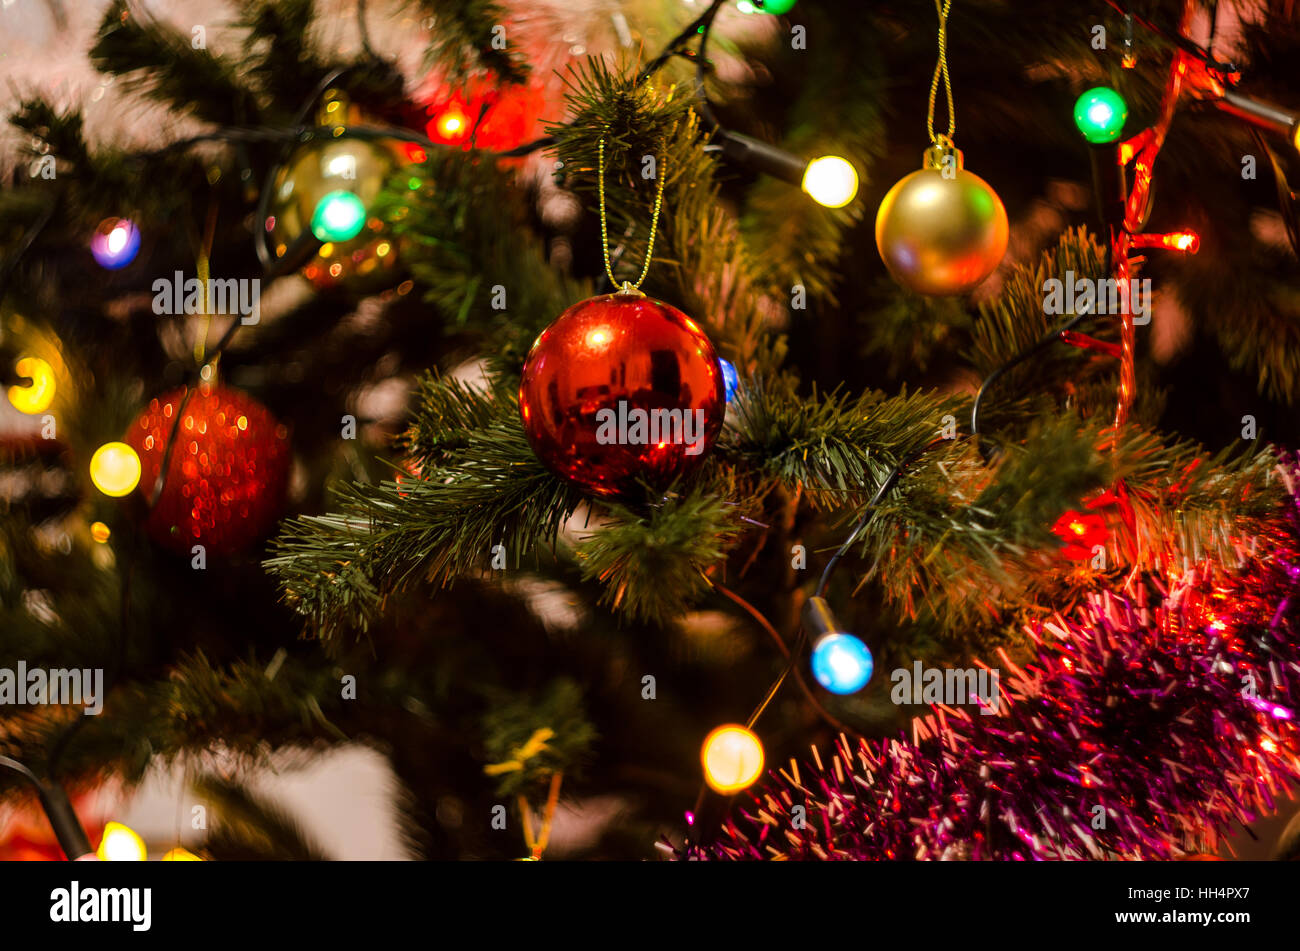 Xmas Tree Balls and Ornaments in DIfferent Colours Stock Photo